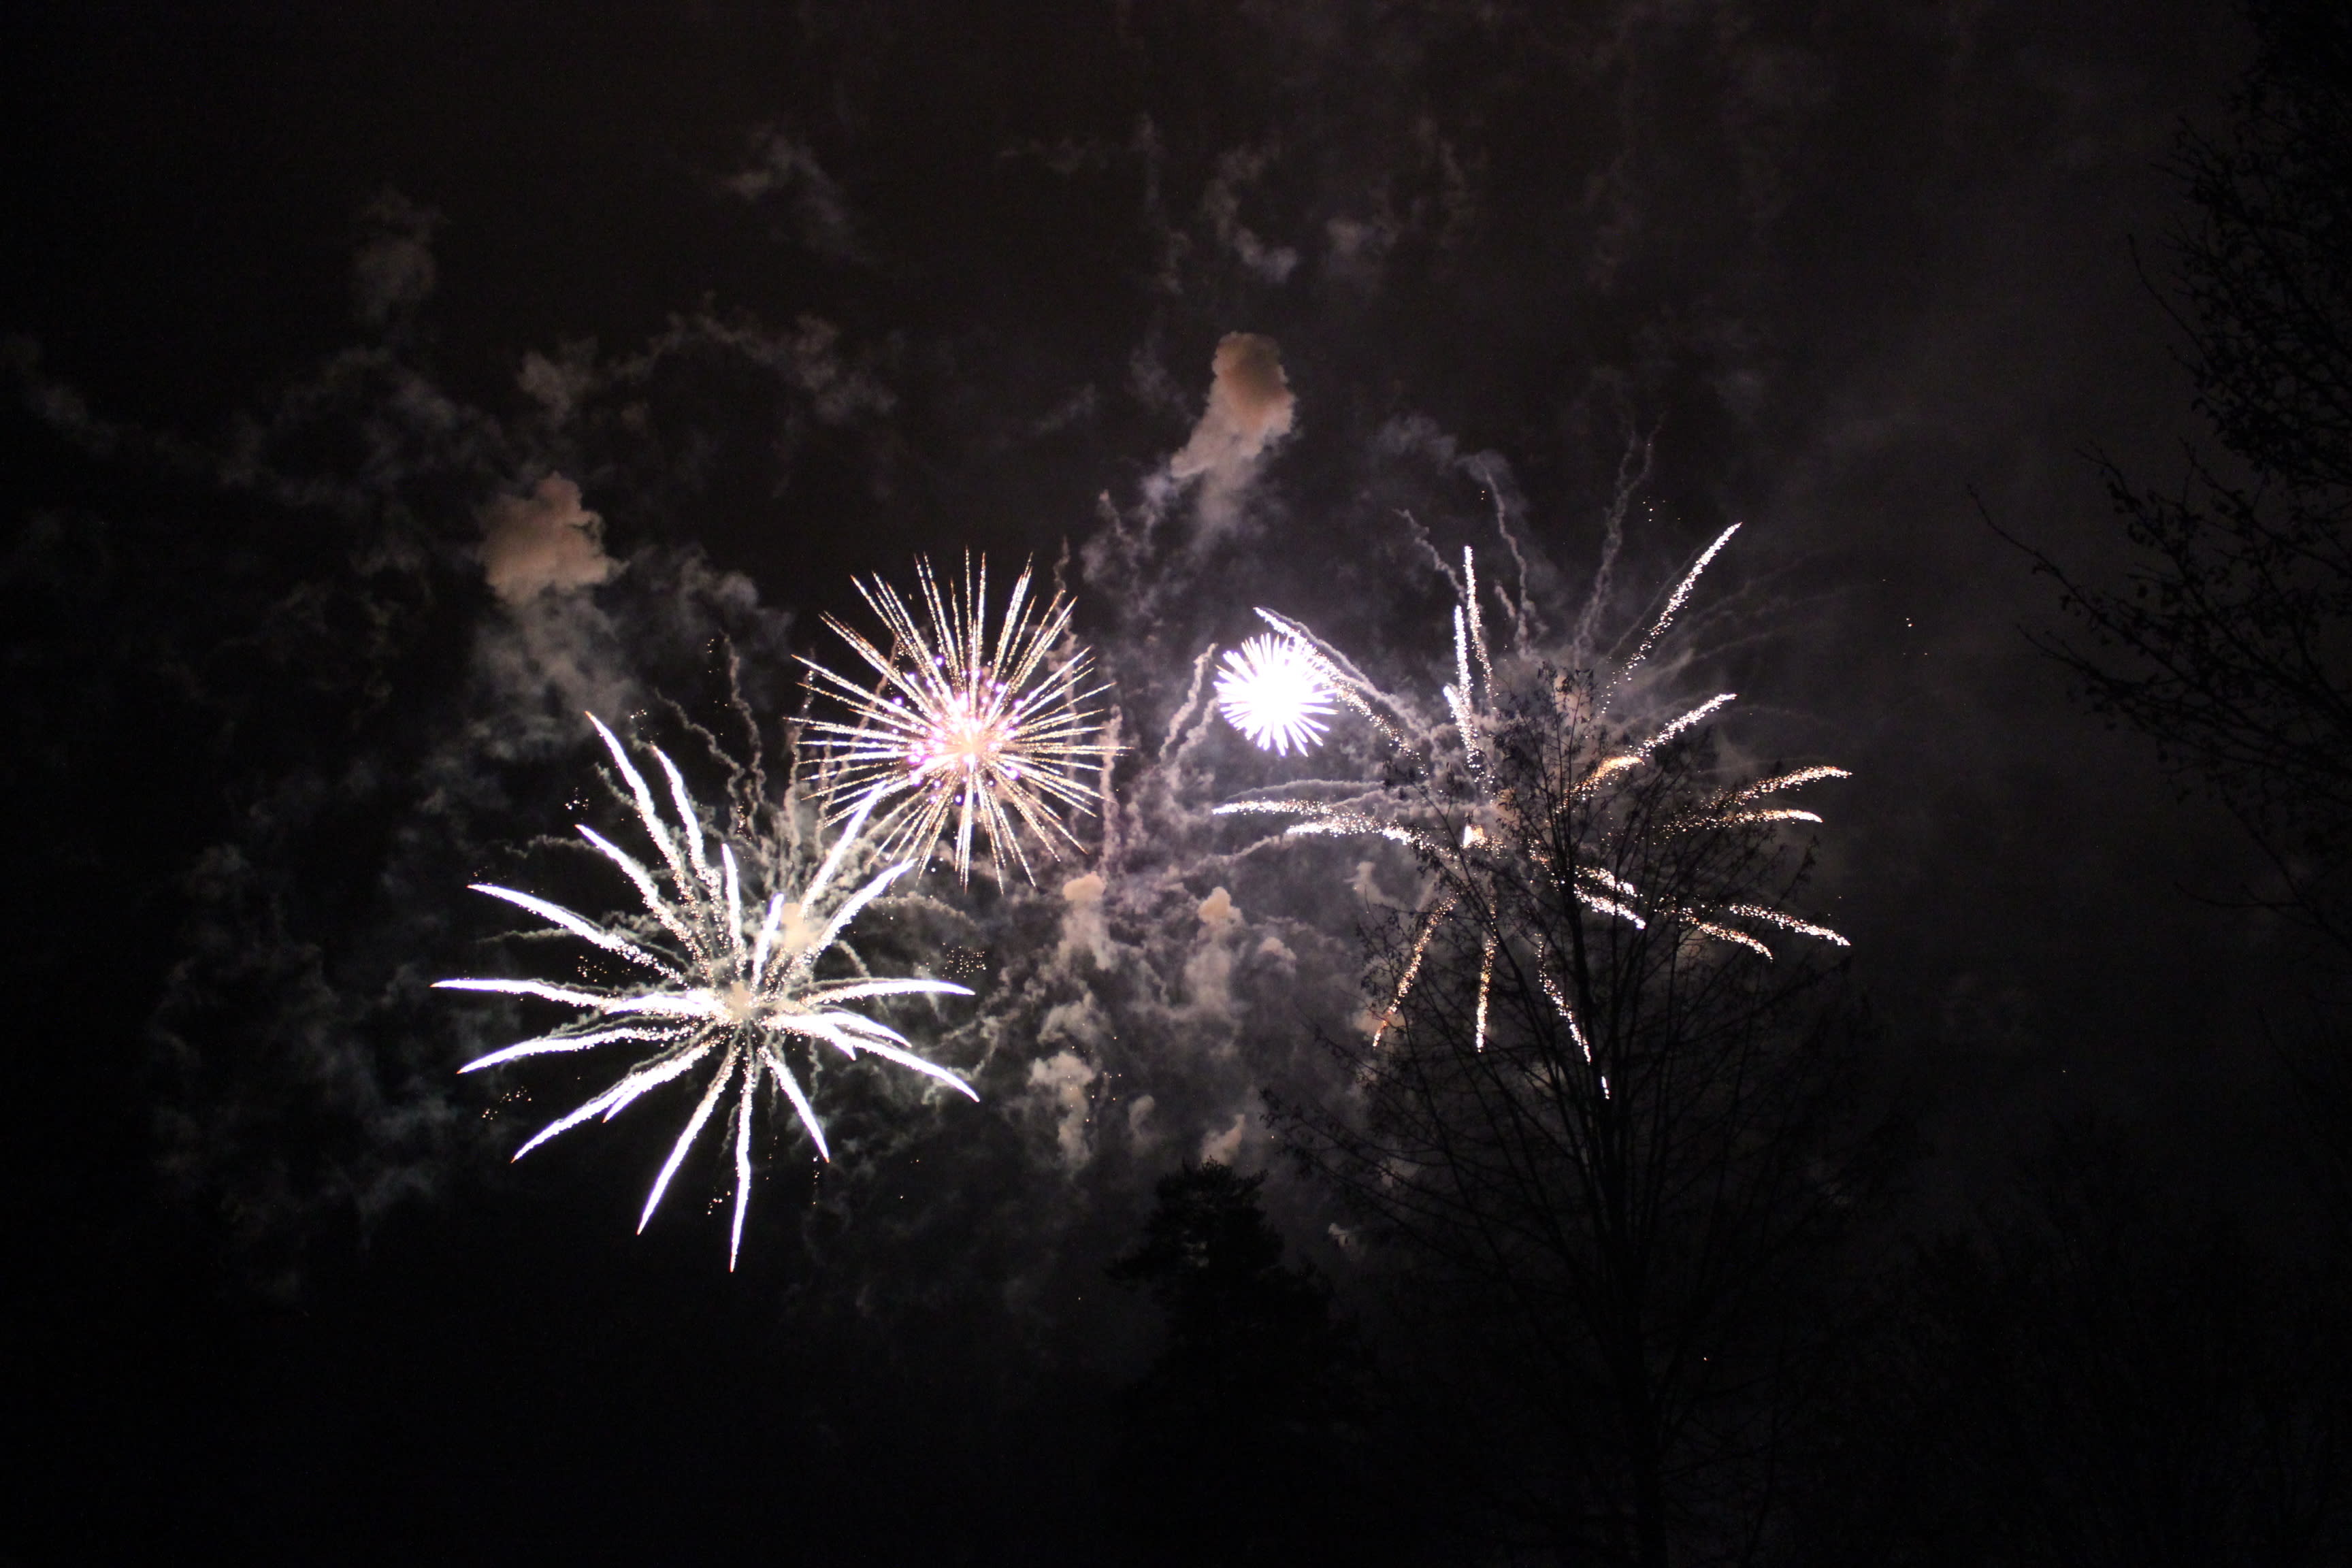 Covid extinguishes Finland’s traditional New Year’s fireworks